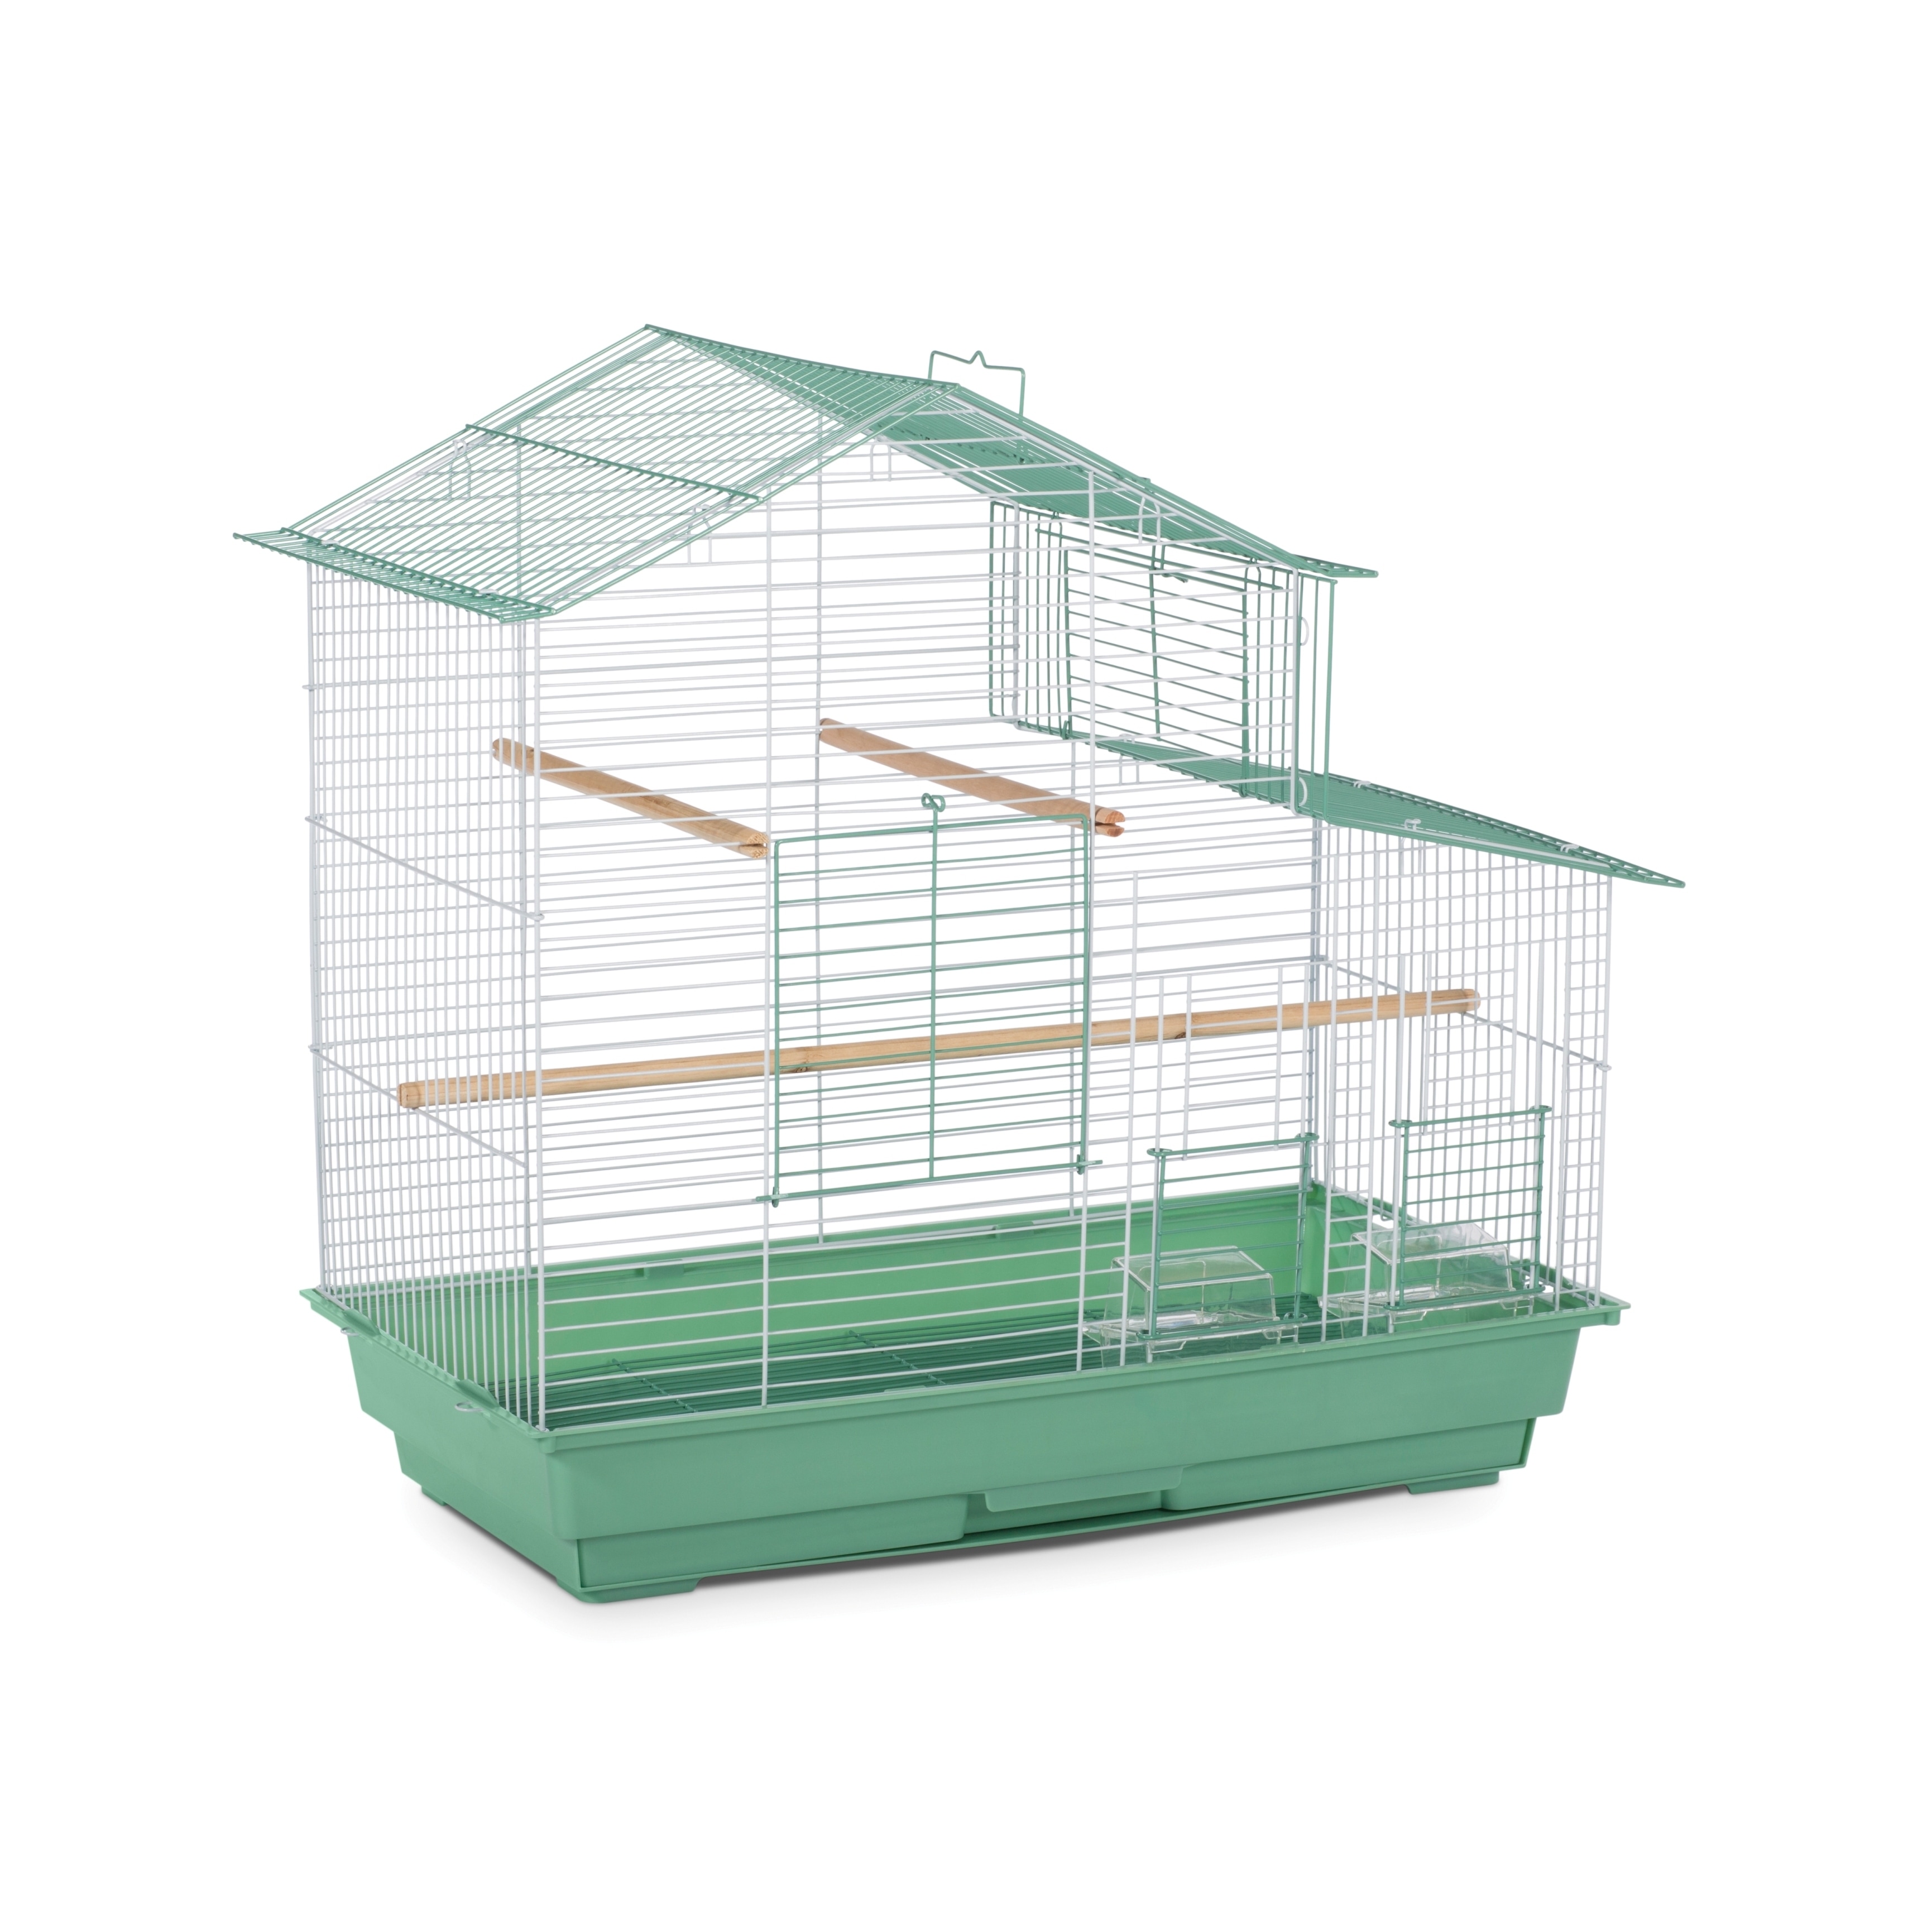 Prevue Pets White Arched Top Companion Bird Cage by Prevue Pet Products New 